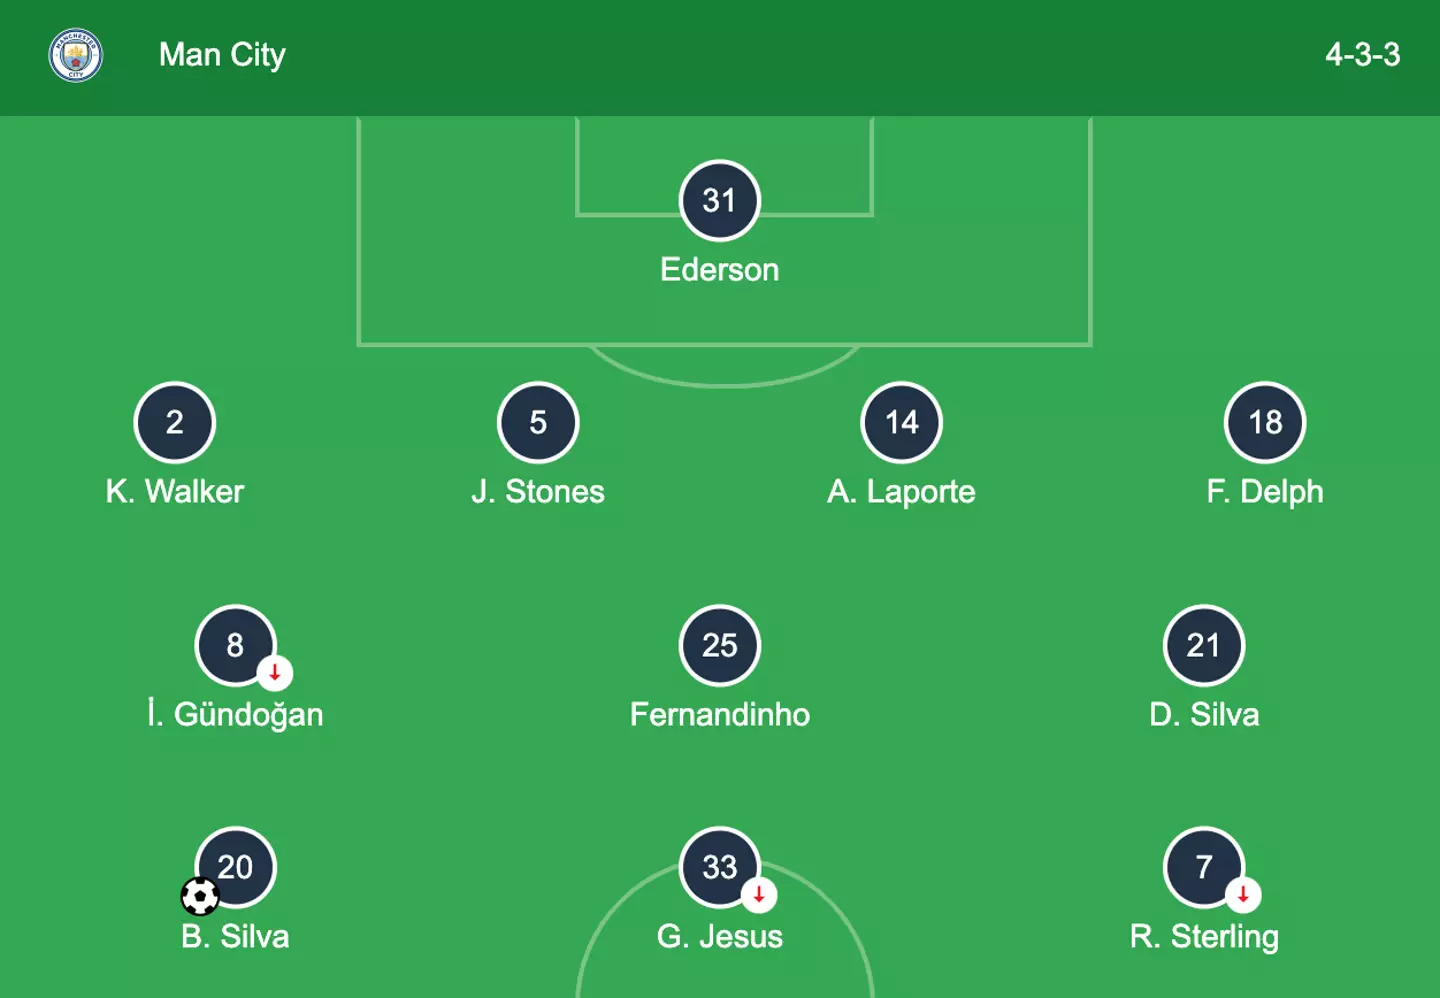 The City team during Arteta's sole match in charge. (Image